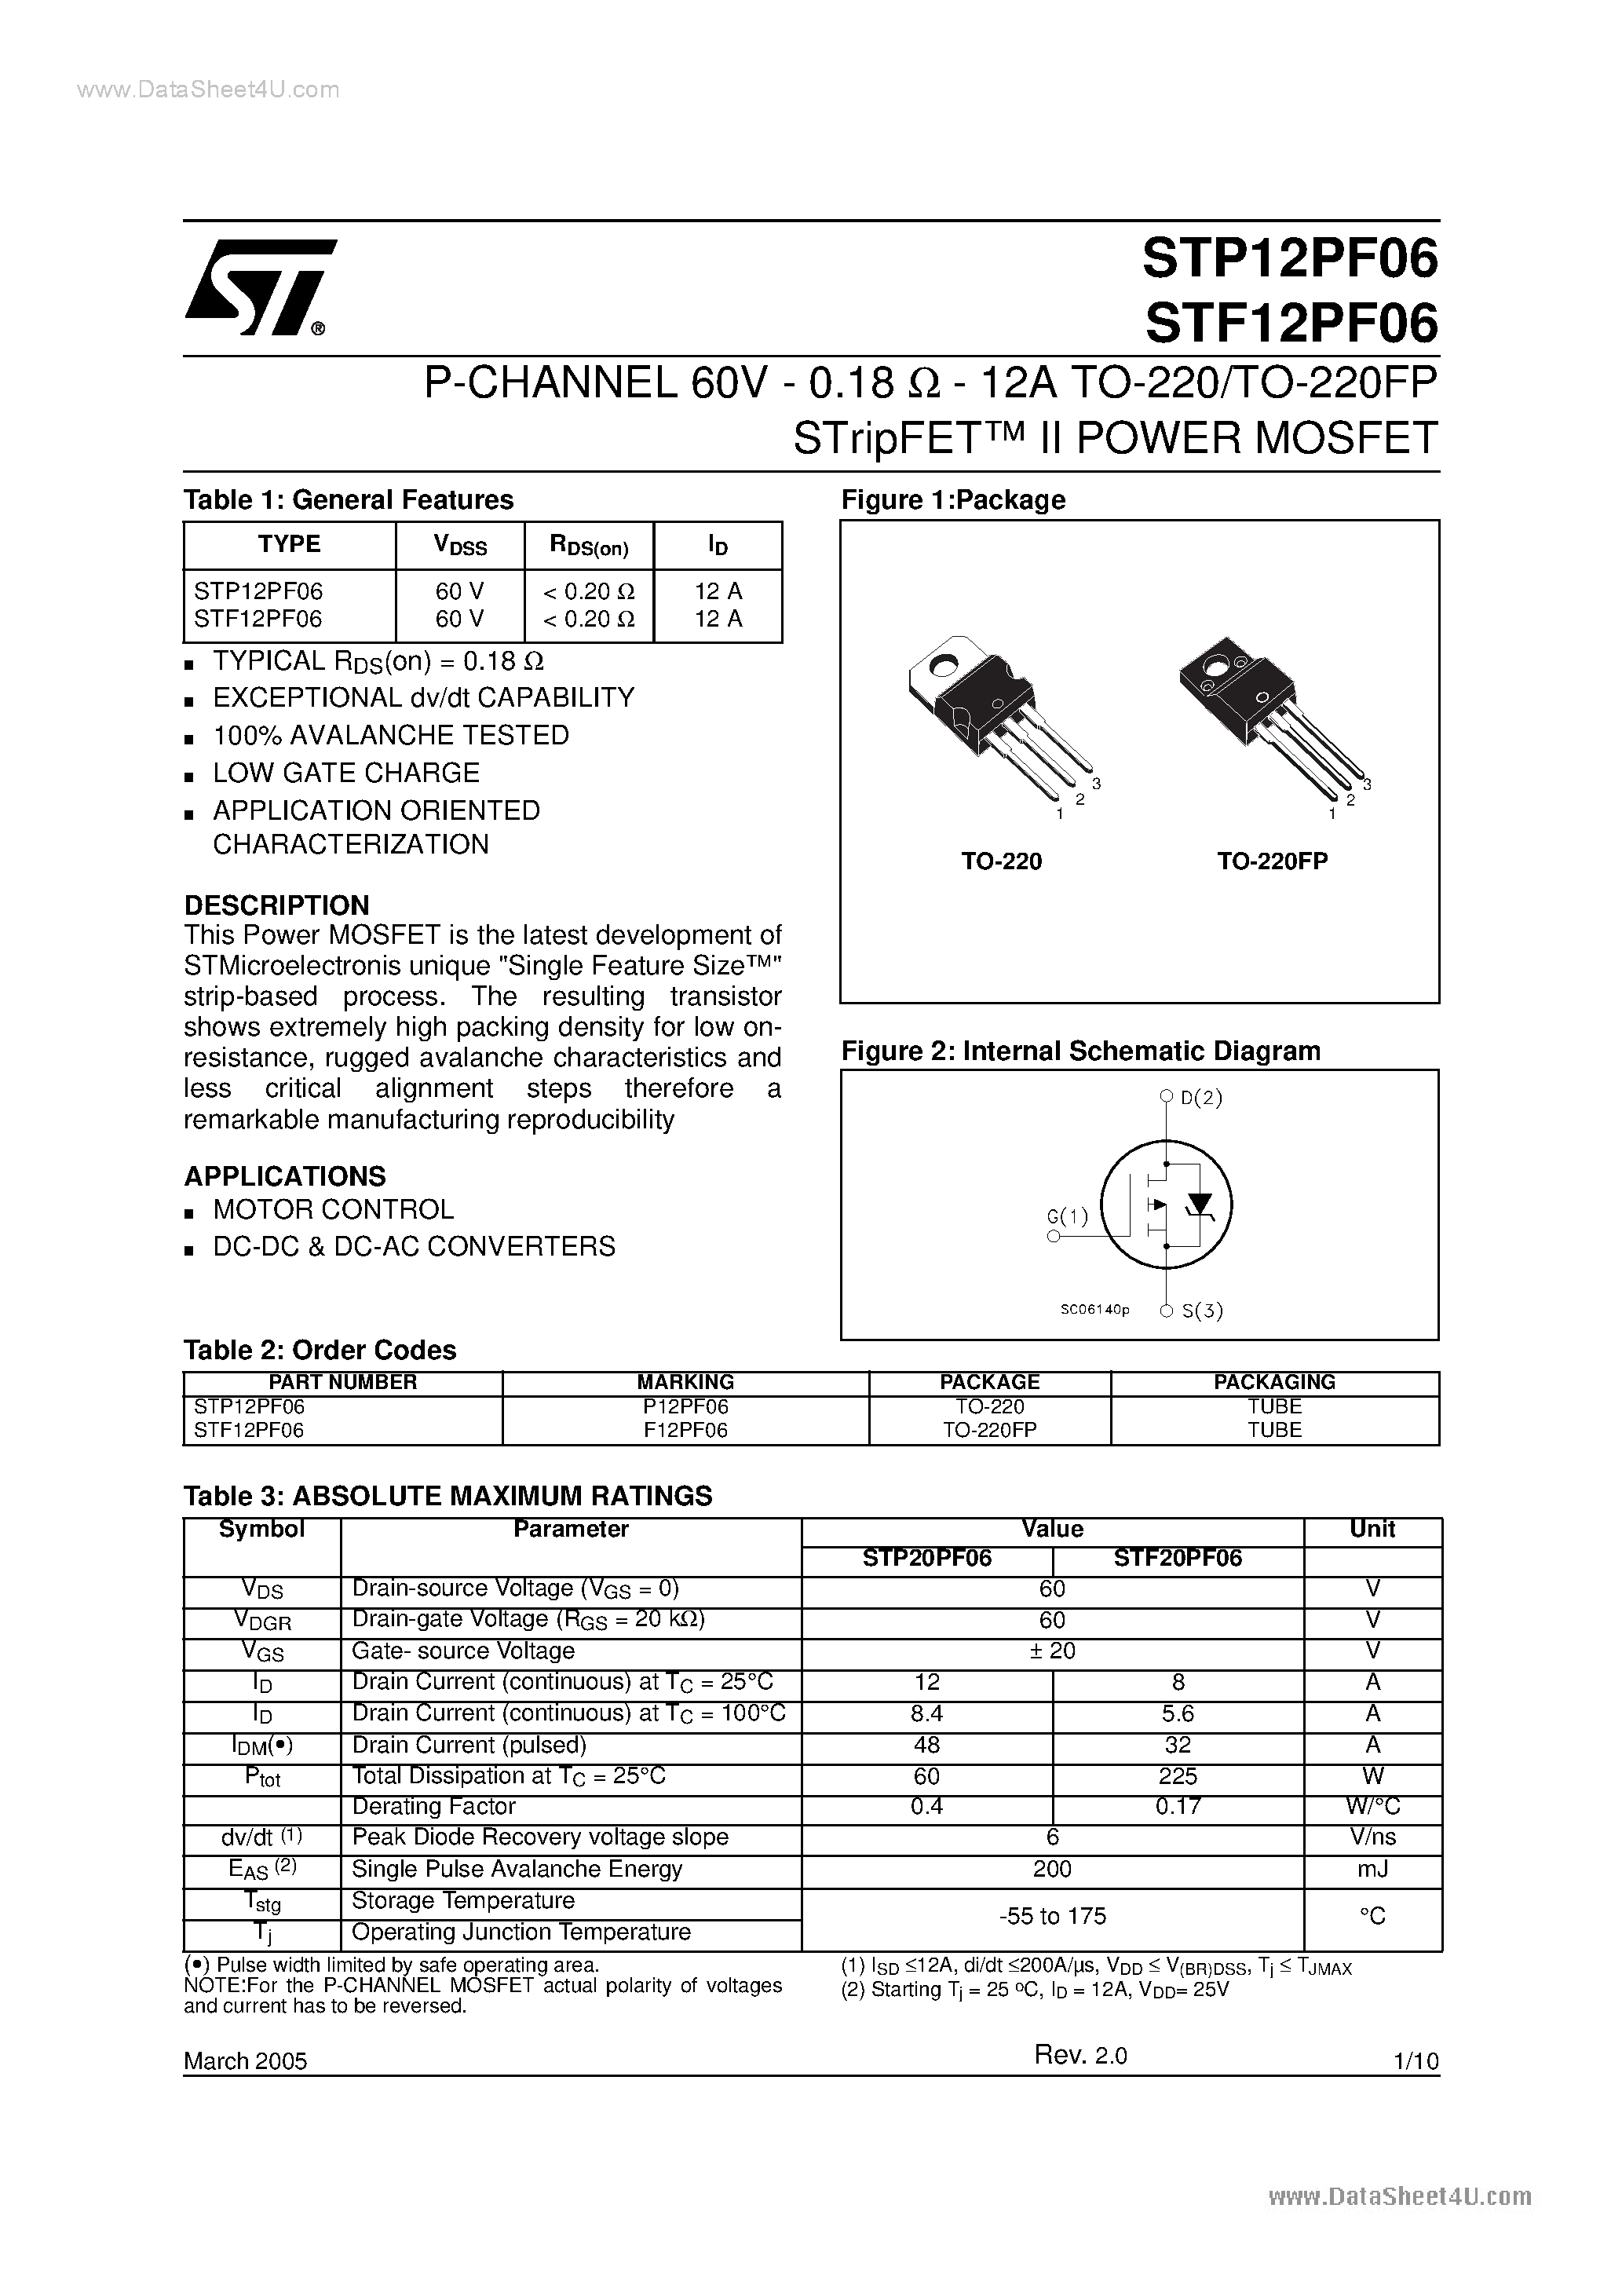 Datasheet STP12PF06 - P-CHANNEL POWER MOSFET page 1